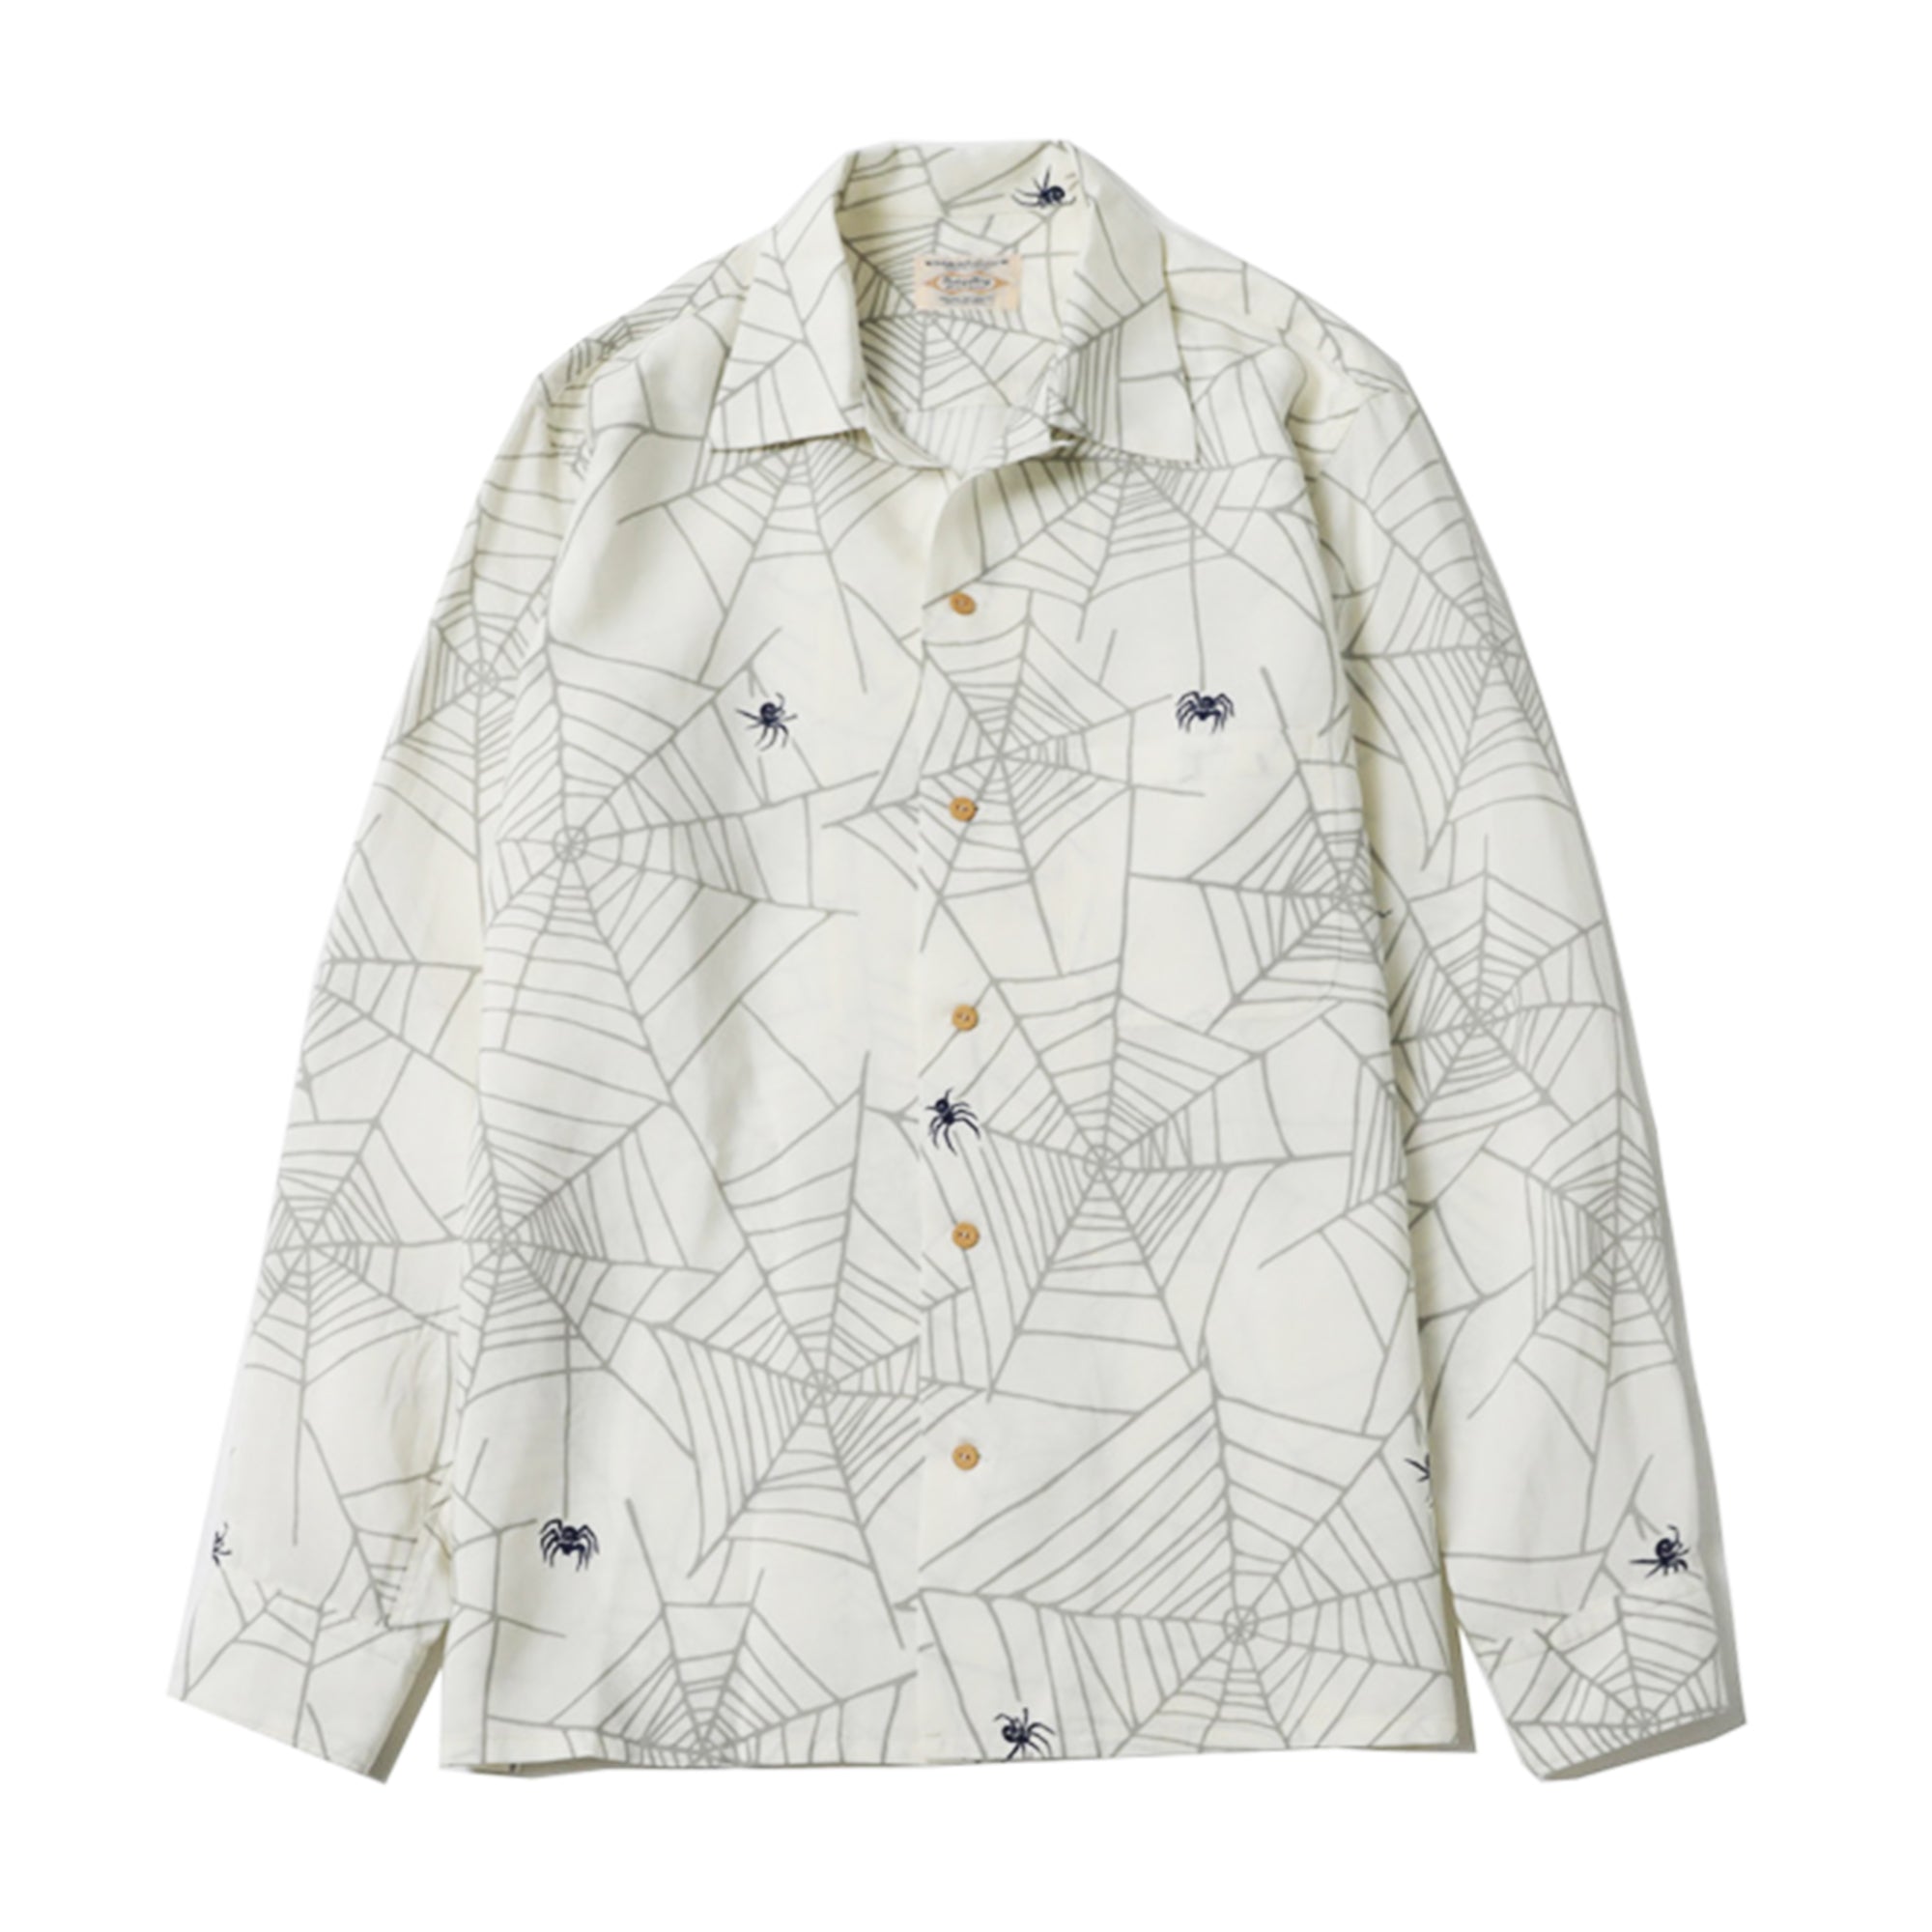 RUDE GALLERY SPIDER WEB OPEN COLLAR SHIRT at Mannahatta NYC